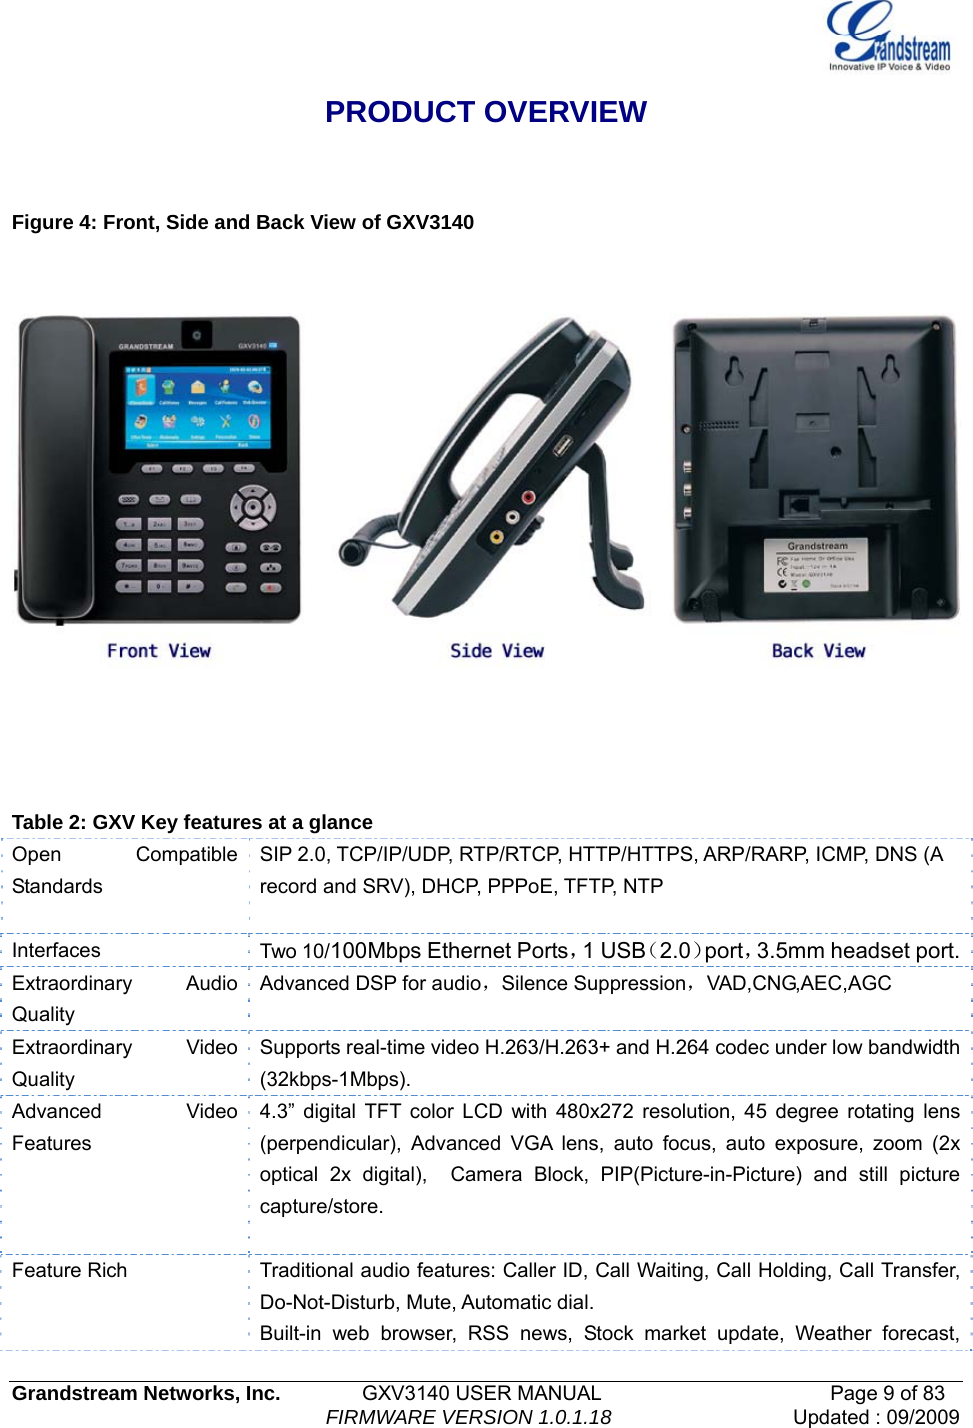   Grandstream Networks, Inc.        GXV3140 USER MANUAL                       Page 9 of 83                                FIRMWARE VERSION 1.0.1.18 Updated : 09/2009  PRODUCT OVERVIEW  Figure 4: Front, Side and Back View of GXV3140       Table 2: GXV Key features at a glance Open Compatible Standards  SIP 2.0, TCP/IP/UDP, RTP/RTCP, HTTP/HTTPS, ARP/RARP, ICMP, DNS (A record and SRV), DHCP, PPPoE, TFTP, NTP Interfaces  Two 10/100Mbps Ethernet Ports，1 USB（2.0）port，3.5mm headset port.Extraordinary Audio Quality Advanced DSP for audio，Silence Suppression，VAD,CNG,AEC,AGC Extraordinary Video Quality Supports real-time video H.263/H.263+ and H.264 codec under low bandwidth (32kbps-1Mbps). Advanced Video Features  4.3” digital TFT color LCD with 480x272 resolution, 45 degree rotating lens (perpendicular), Advanced VGA lens, auto focus, auto exposure, zoom (2x optical 2x digital),  Camera Block, PIP(Picture-in-Picture) and still picture capture/store.  Feature Rich  Traditional audio features: Caller ID, Call Waiting, Call Holding, Call Transfer, Do-Not-Disturb, Mute, Automatic dial.   Built-in web browser, RSS news, Stock market update, Weather forecast, 